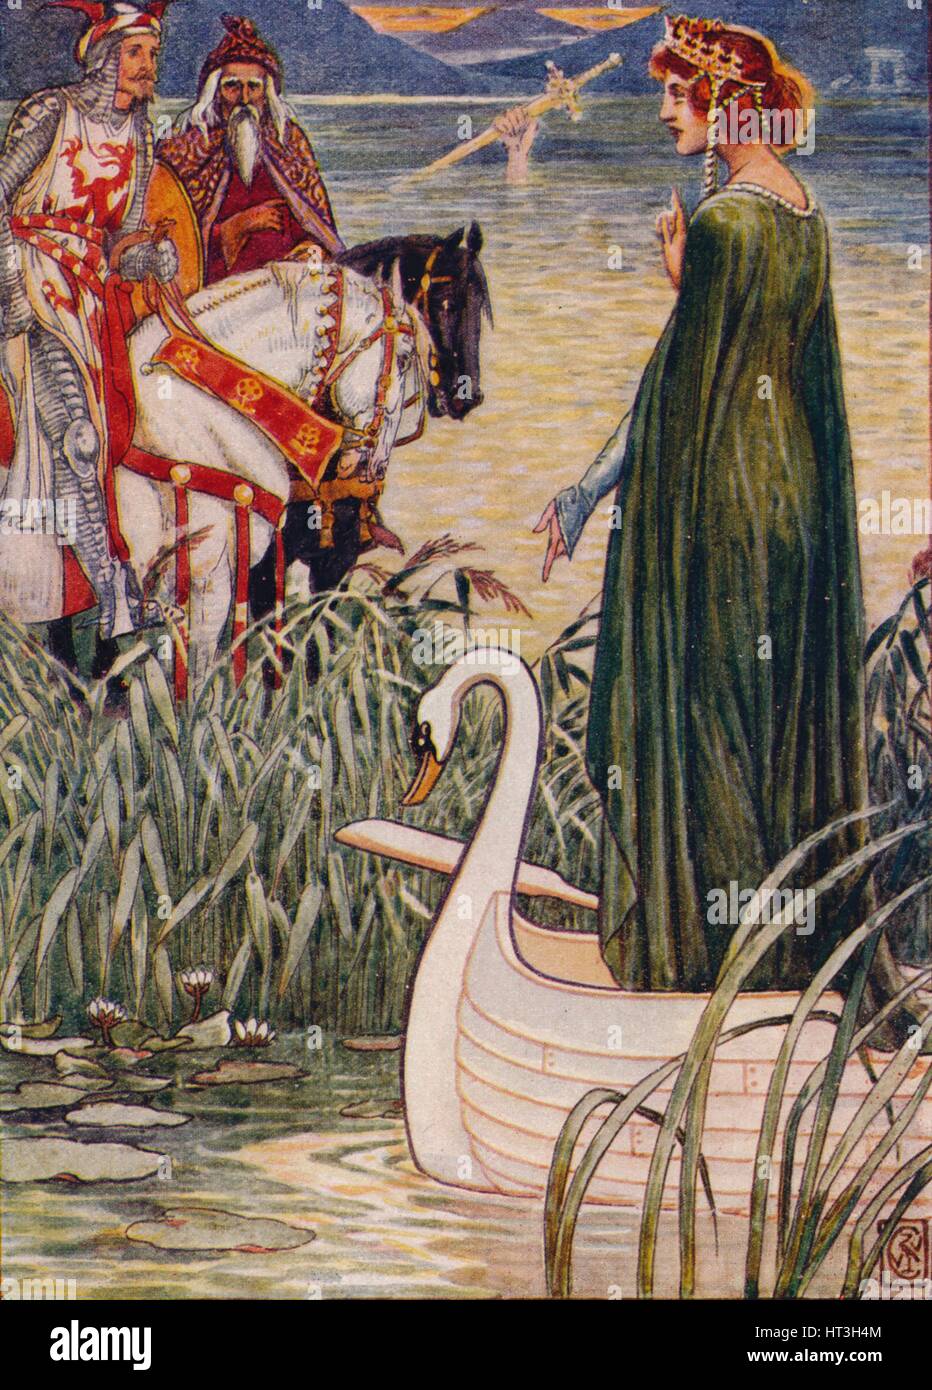 'King Arthur asks the Lady of the Lake for the sword Excalibur', 1911.  Artist: Walter Crane. Stock Photo